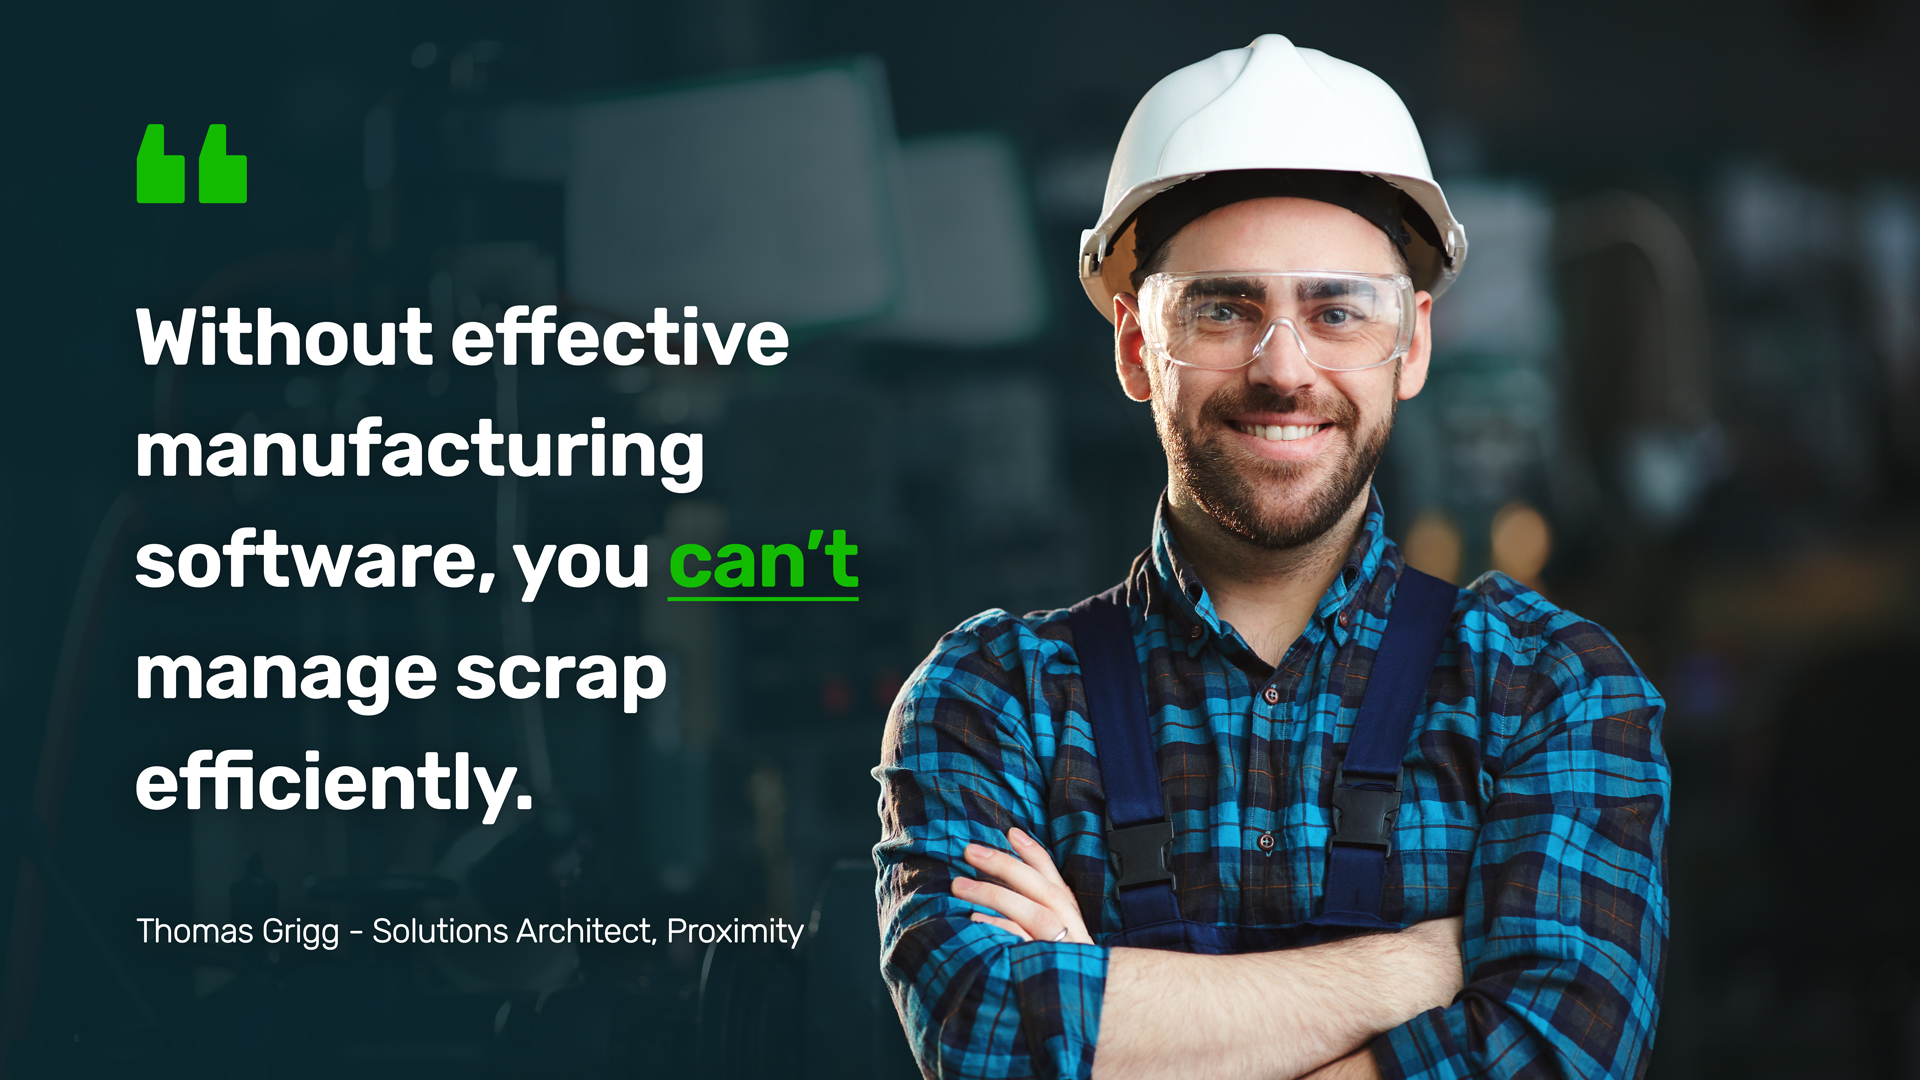 Reducing-Scrap-in-Plastics-Manufacturing-with-DELMIAWorks-without-effective-software-you-can't-manage-scrap-efficiently-pull-quote